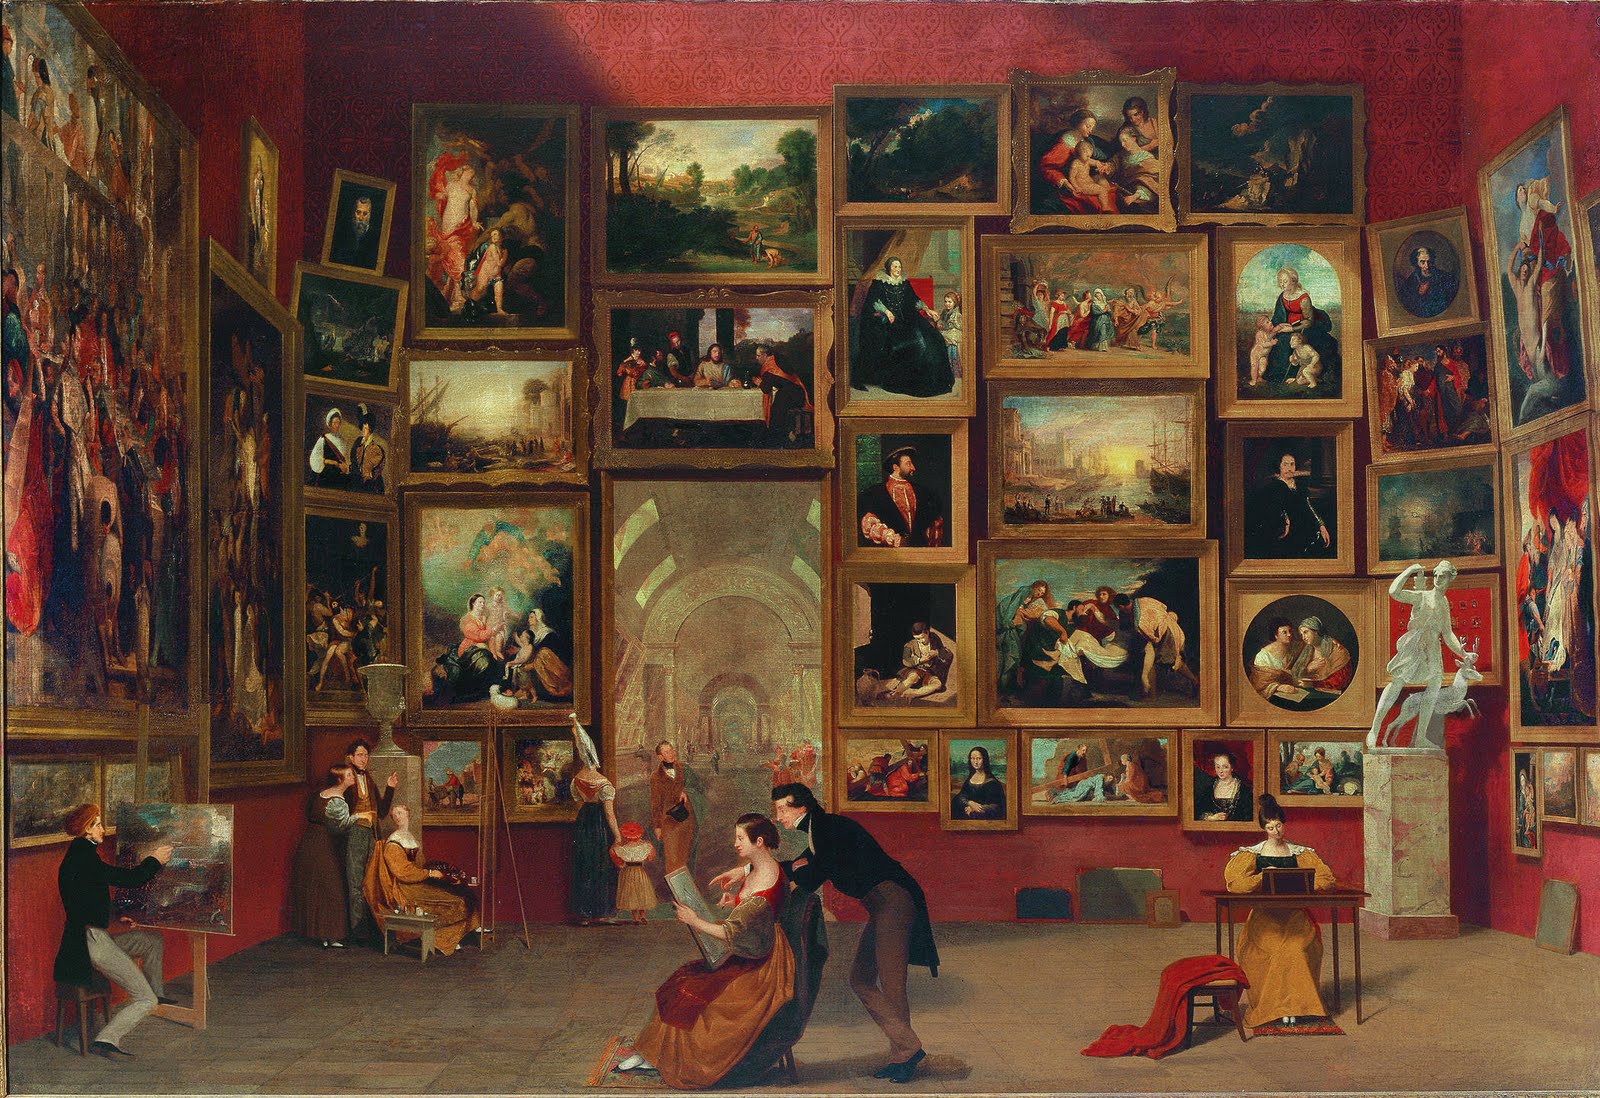 The Gallery of the Louvre by Samuel F. B. Morse - 1831-1833 - 187.3 x 274.3 cm Terra Foundation for American Art